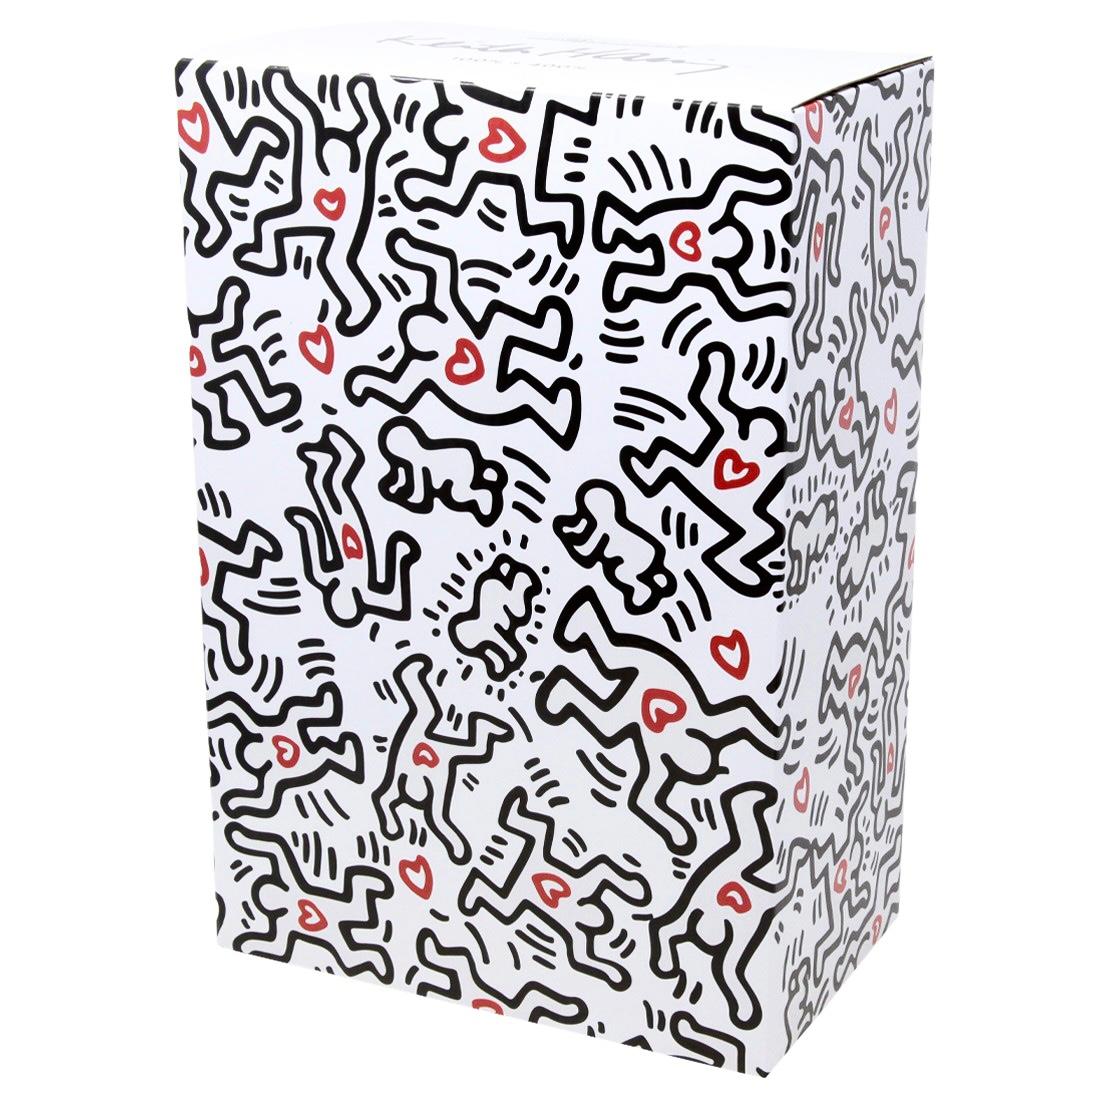 Keith Haring Bearbrick 400% Companion (Haring black & white BE@RBRICK)  - Pop Art Print by (after) Keith Haring